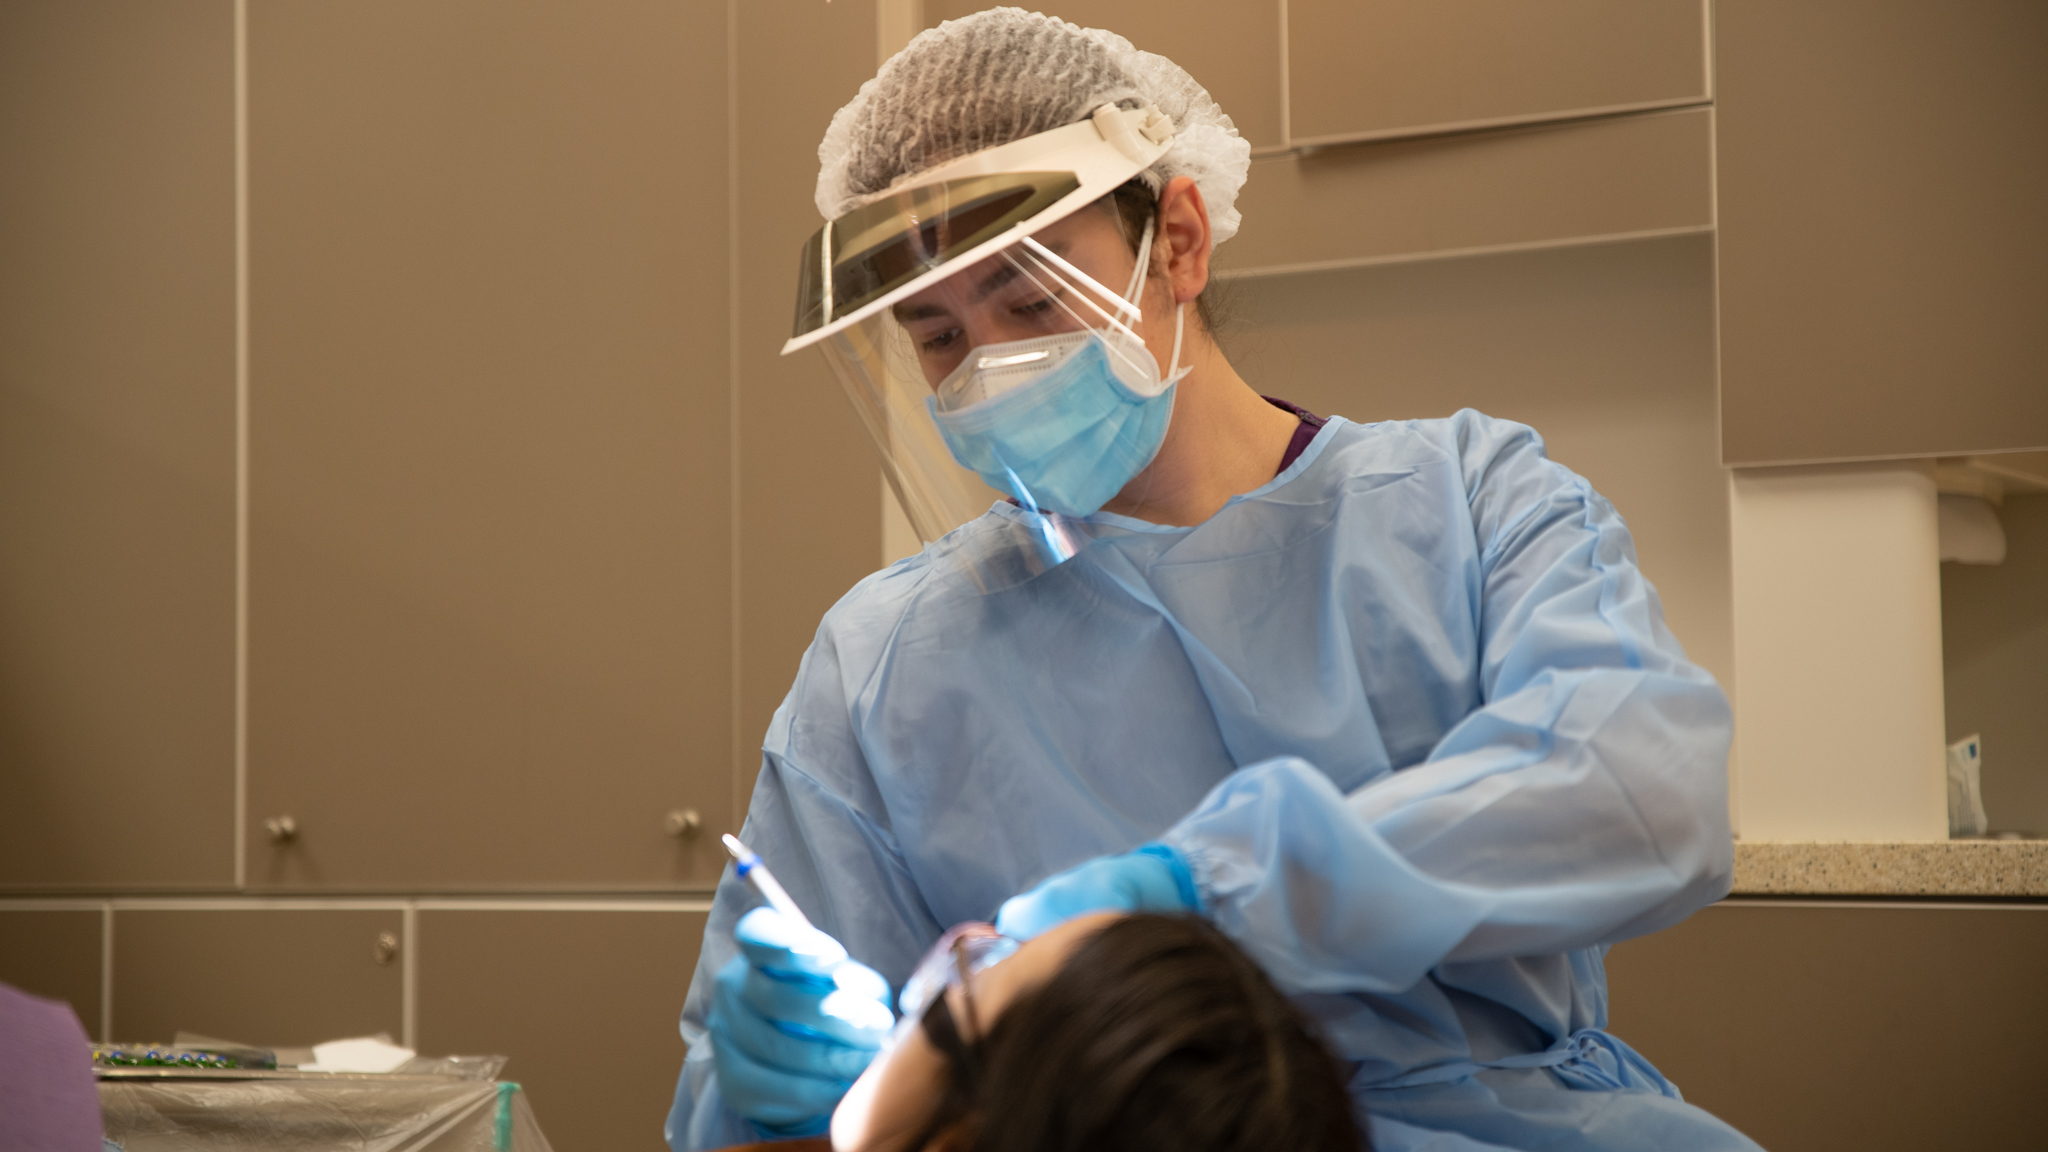 A dental hygenist conducts a procedure on a sitting patient.